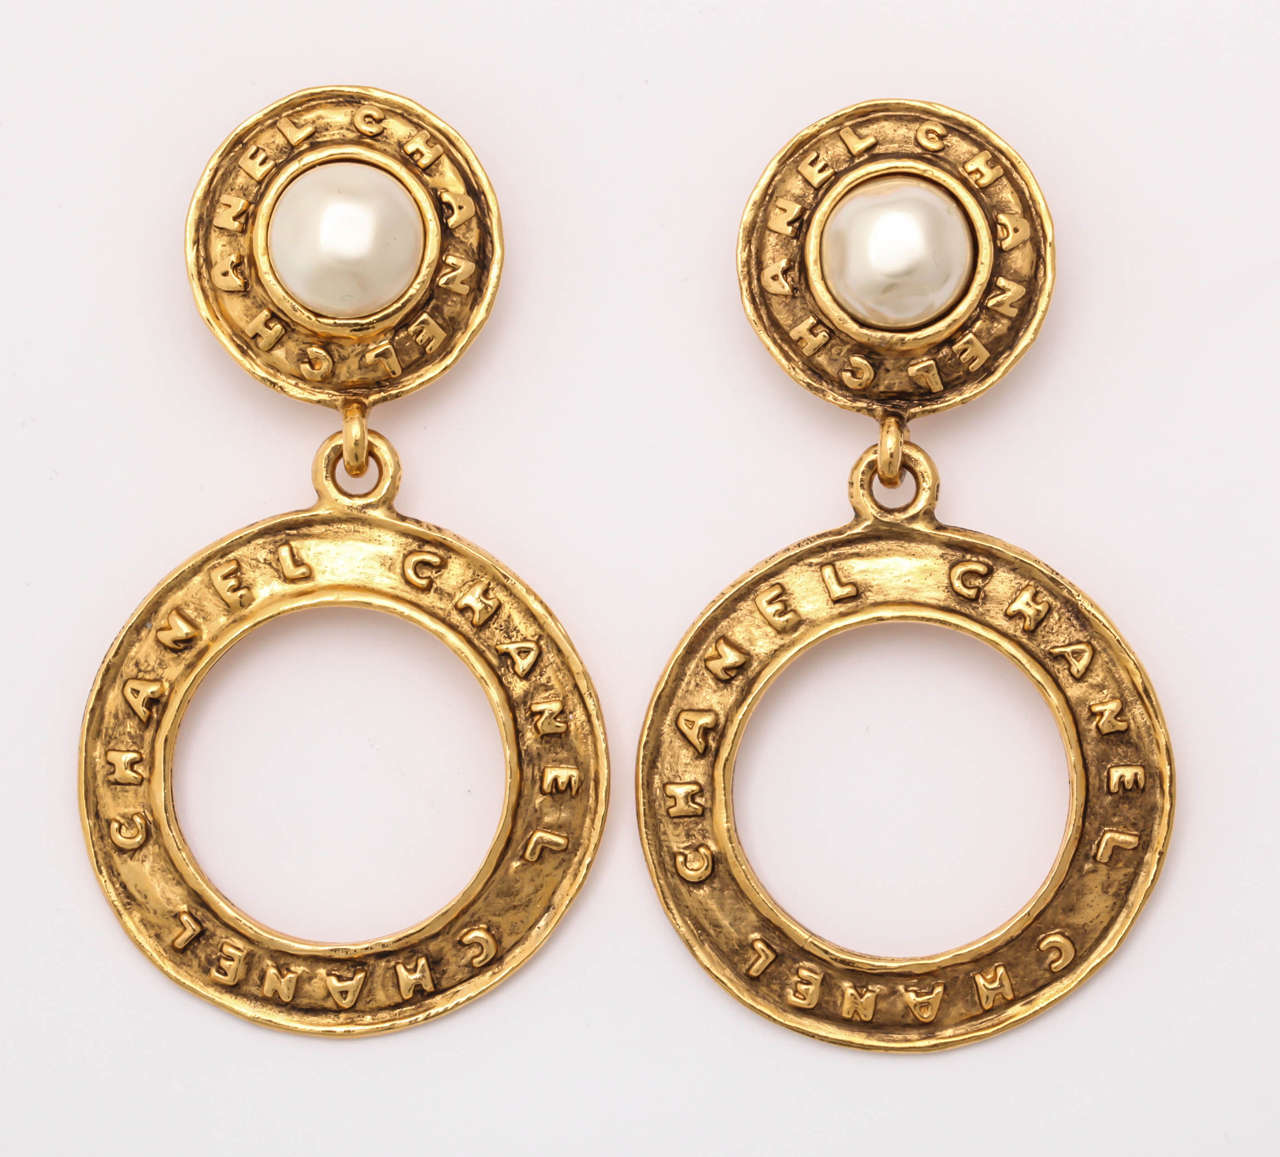 A wonderful pair of hoop earrings with faux pearl by Victoire de Castellane for Chanel.